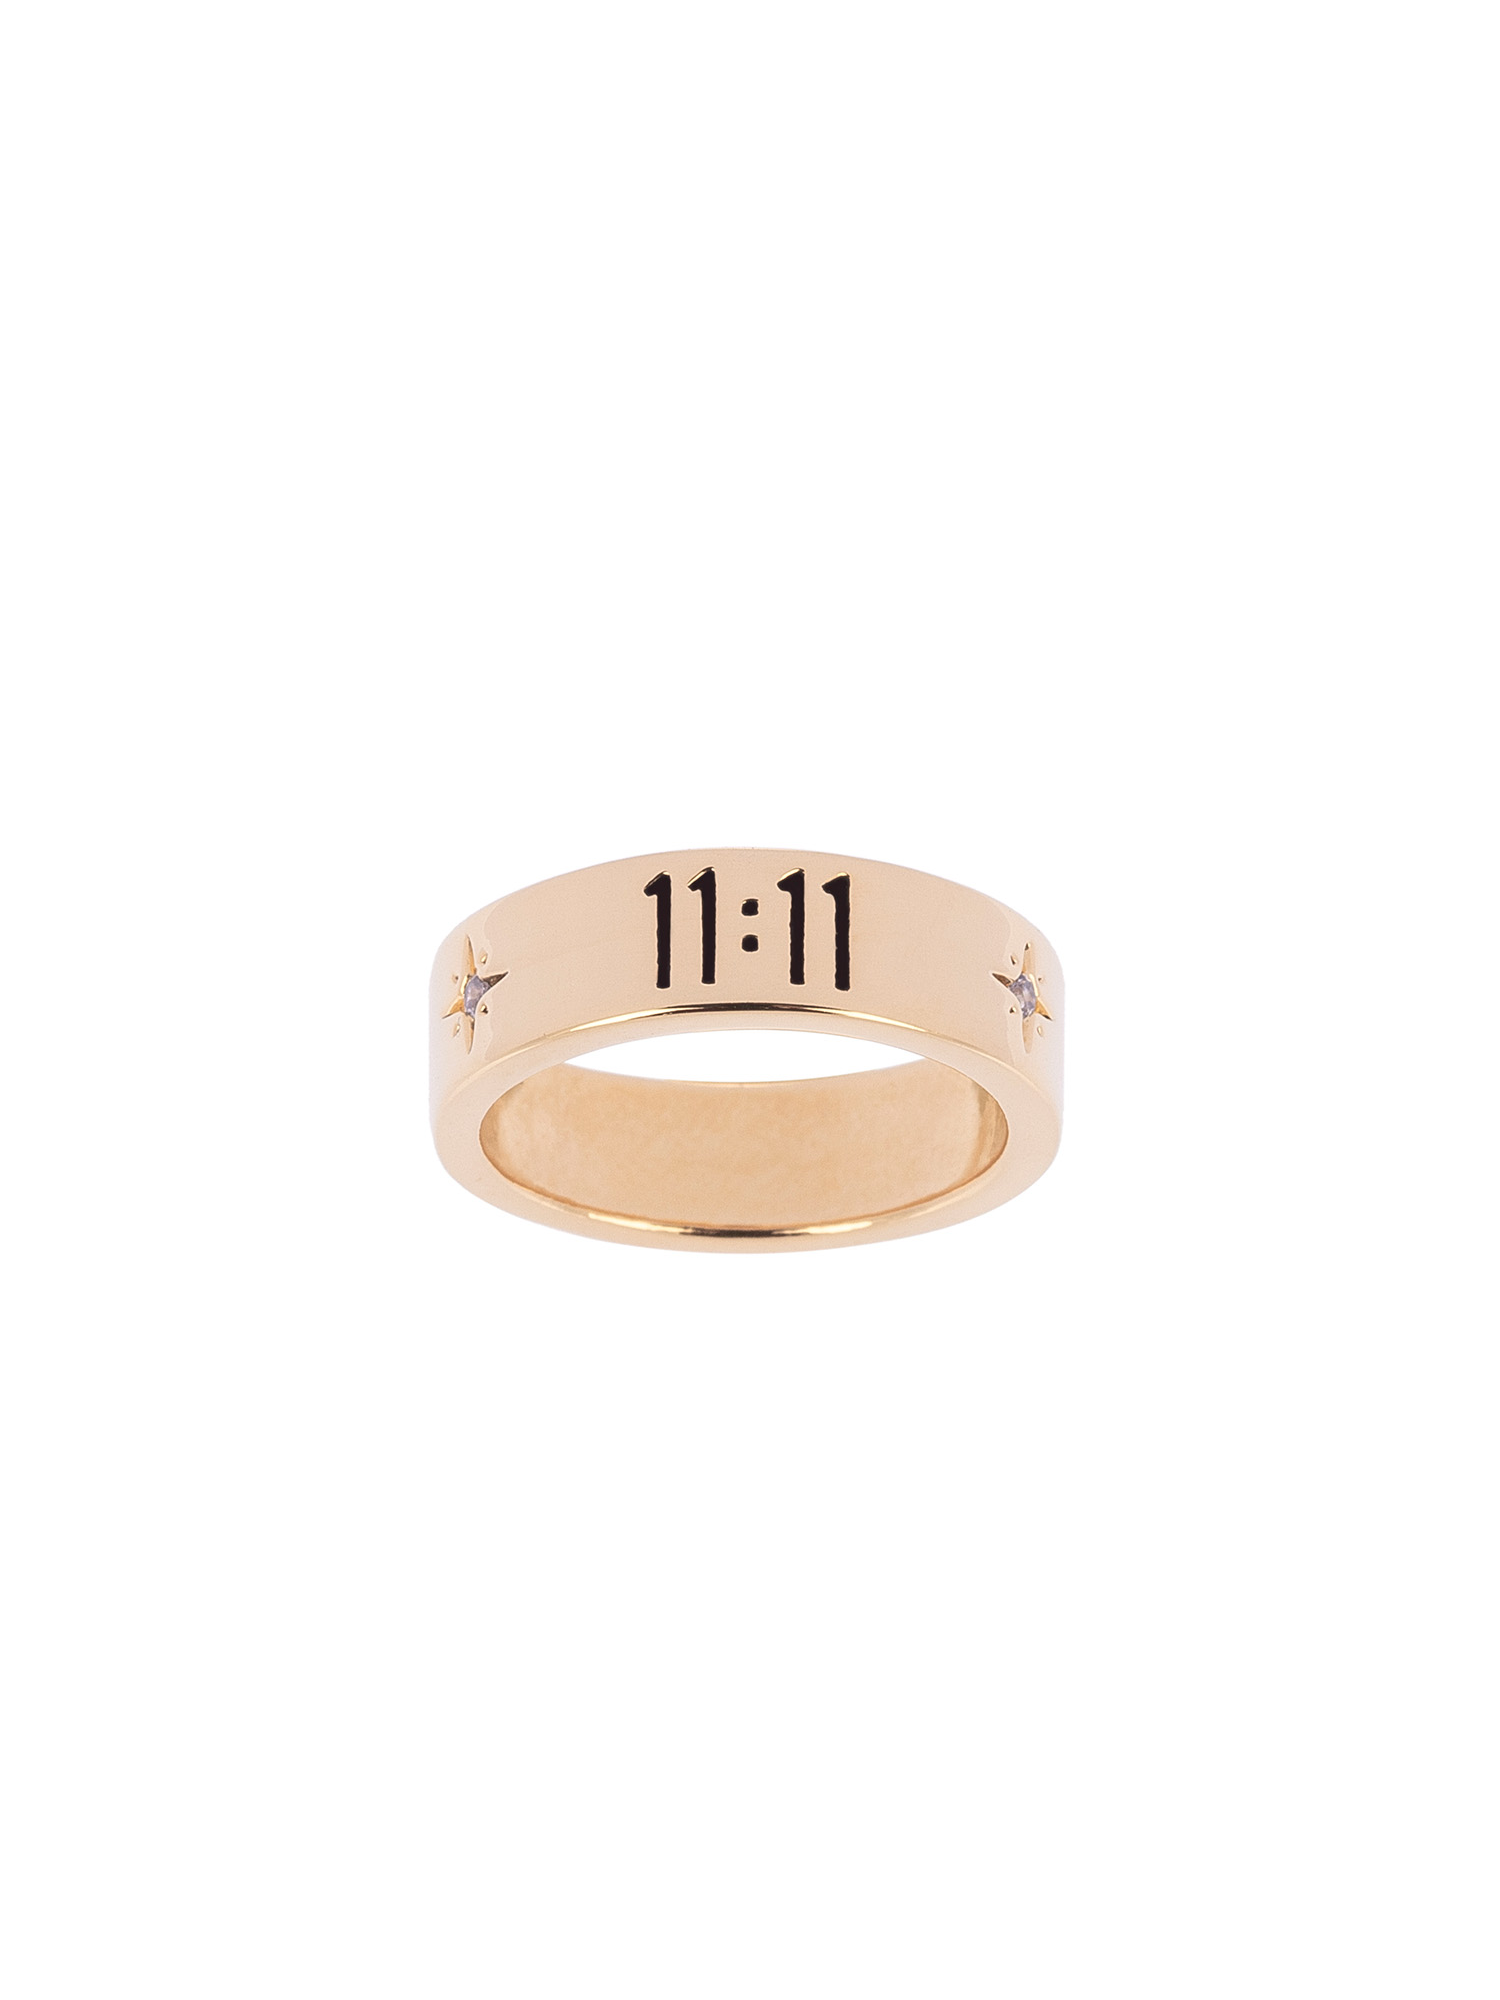 LUCKY ELEVEN RING GOLD